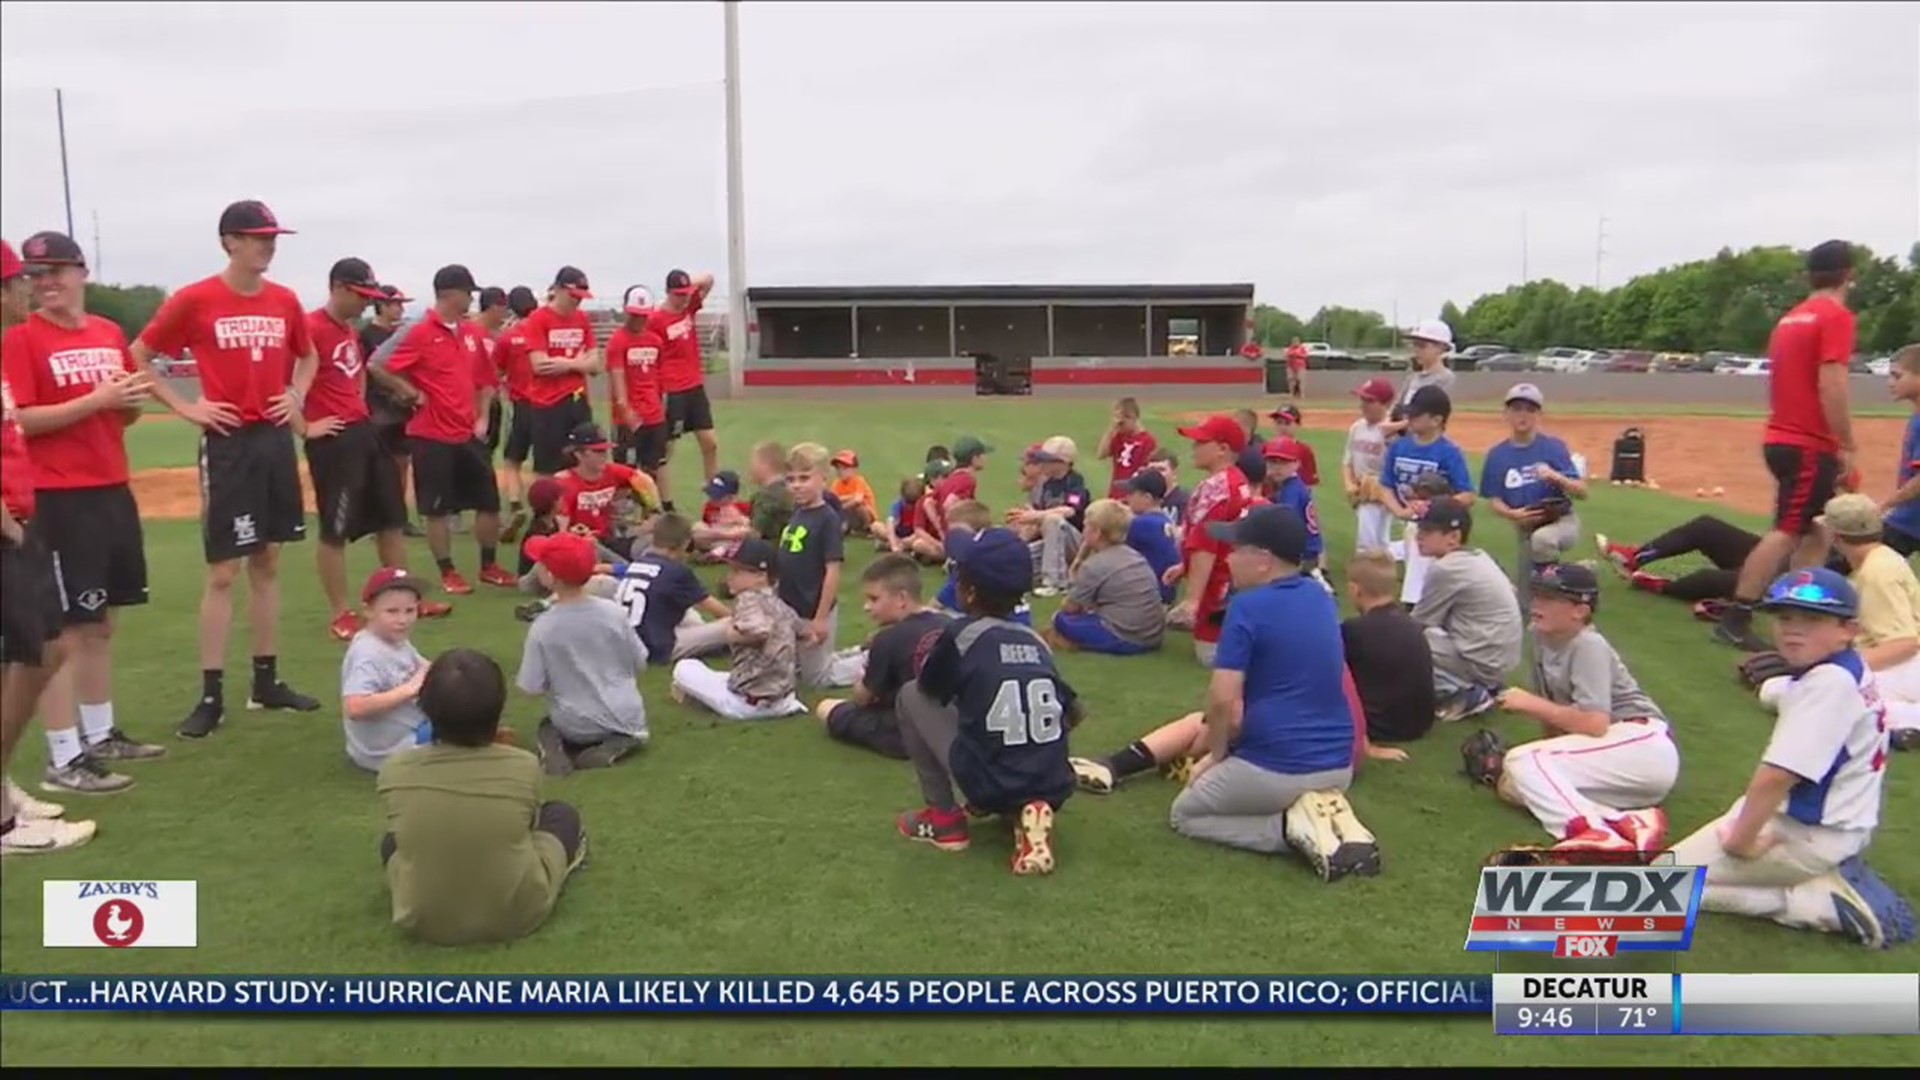 The rain didn't stop the reigning 6A State Champions from hosting their annual baseball camp where they're helping gear up and build up the next generation to win a state title.